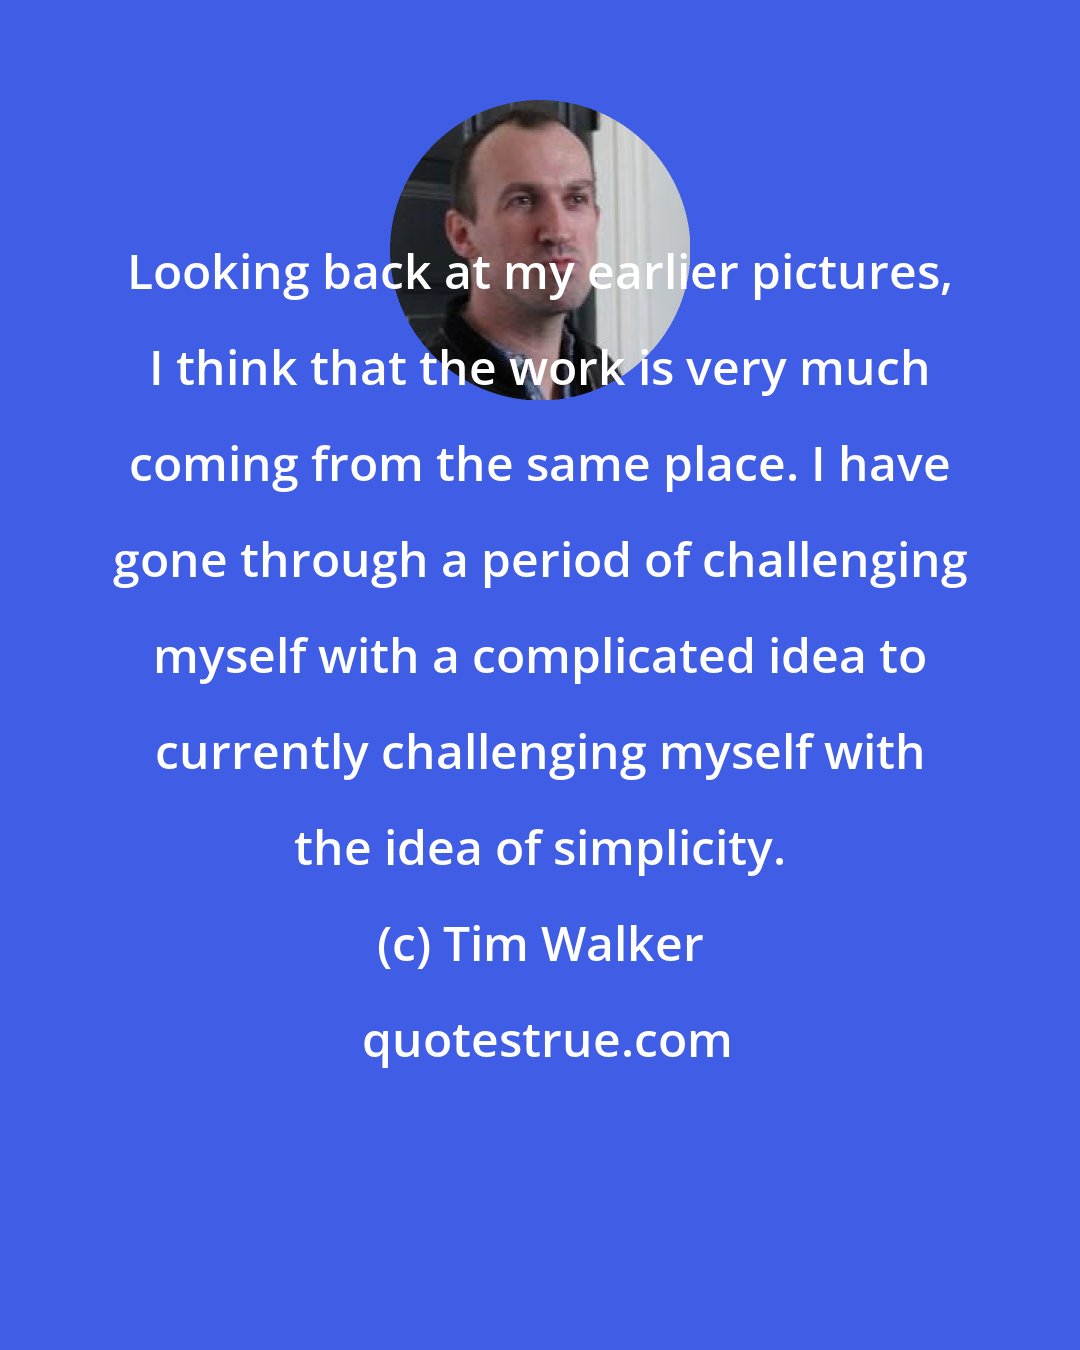 Tim Walker: Looking back at my earlier pictures, I think that the work is very much coming from the same place. I have gone through a period of challenging myself with a complicated idea to currently challenging myself with the idea of simplicity.